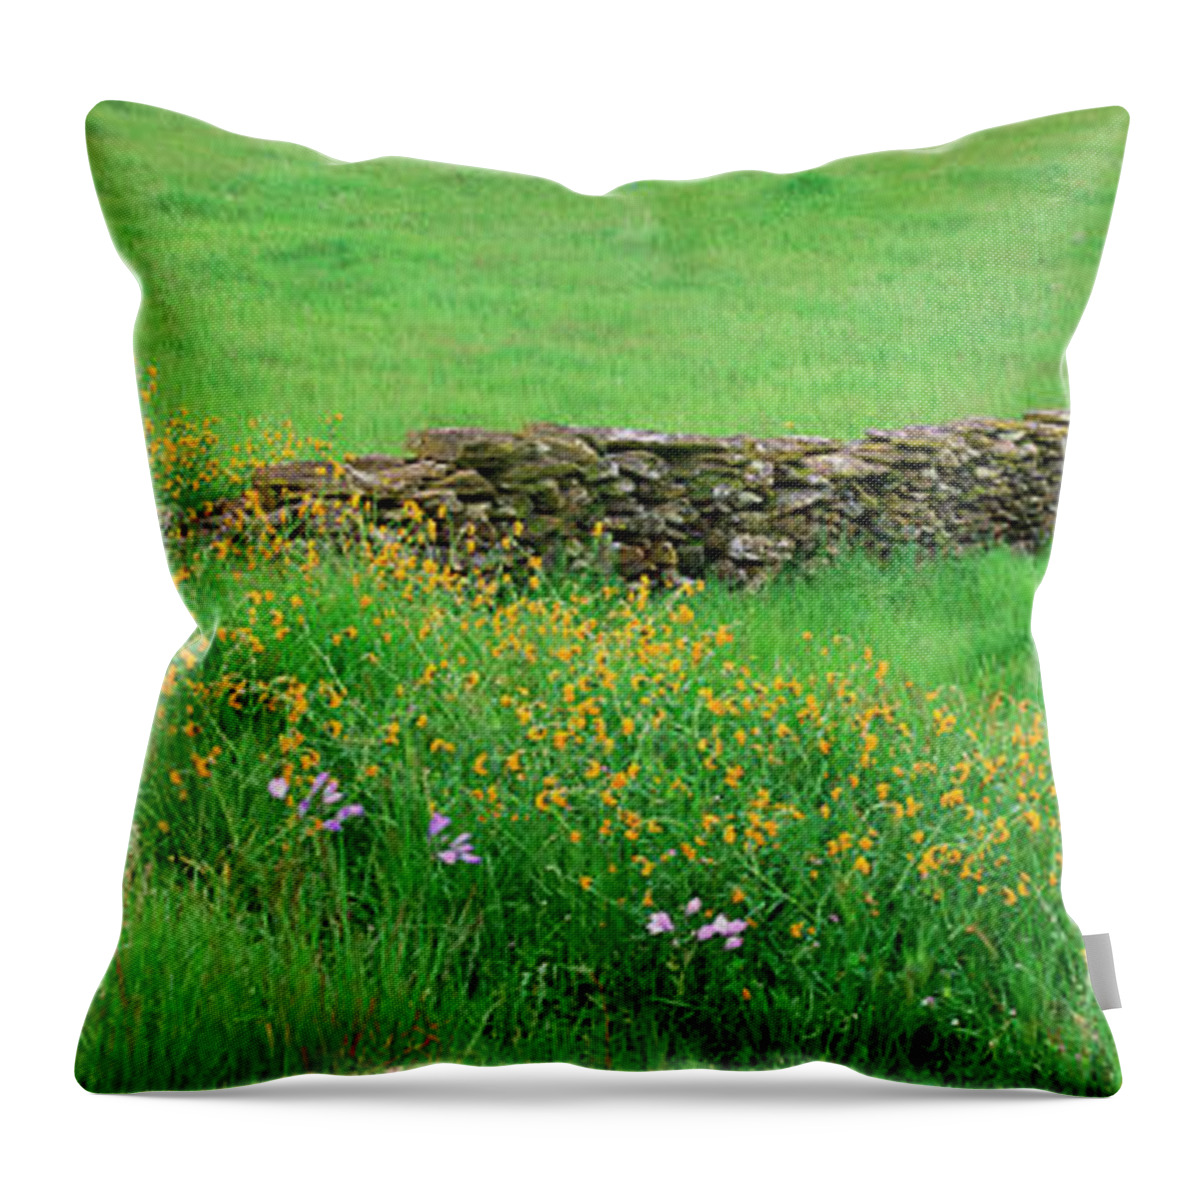 Scenics Throw Pillow featuring the photograph Meadow With Stone Wall And Wildflowers by Mint Images - David Schultz